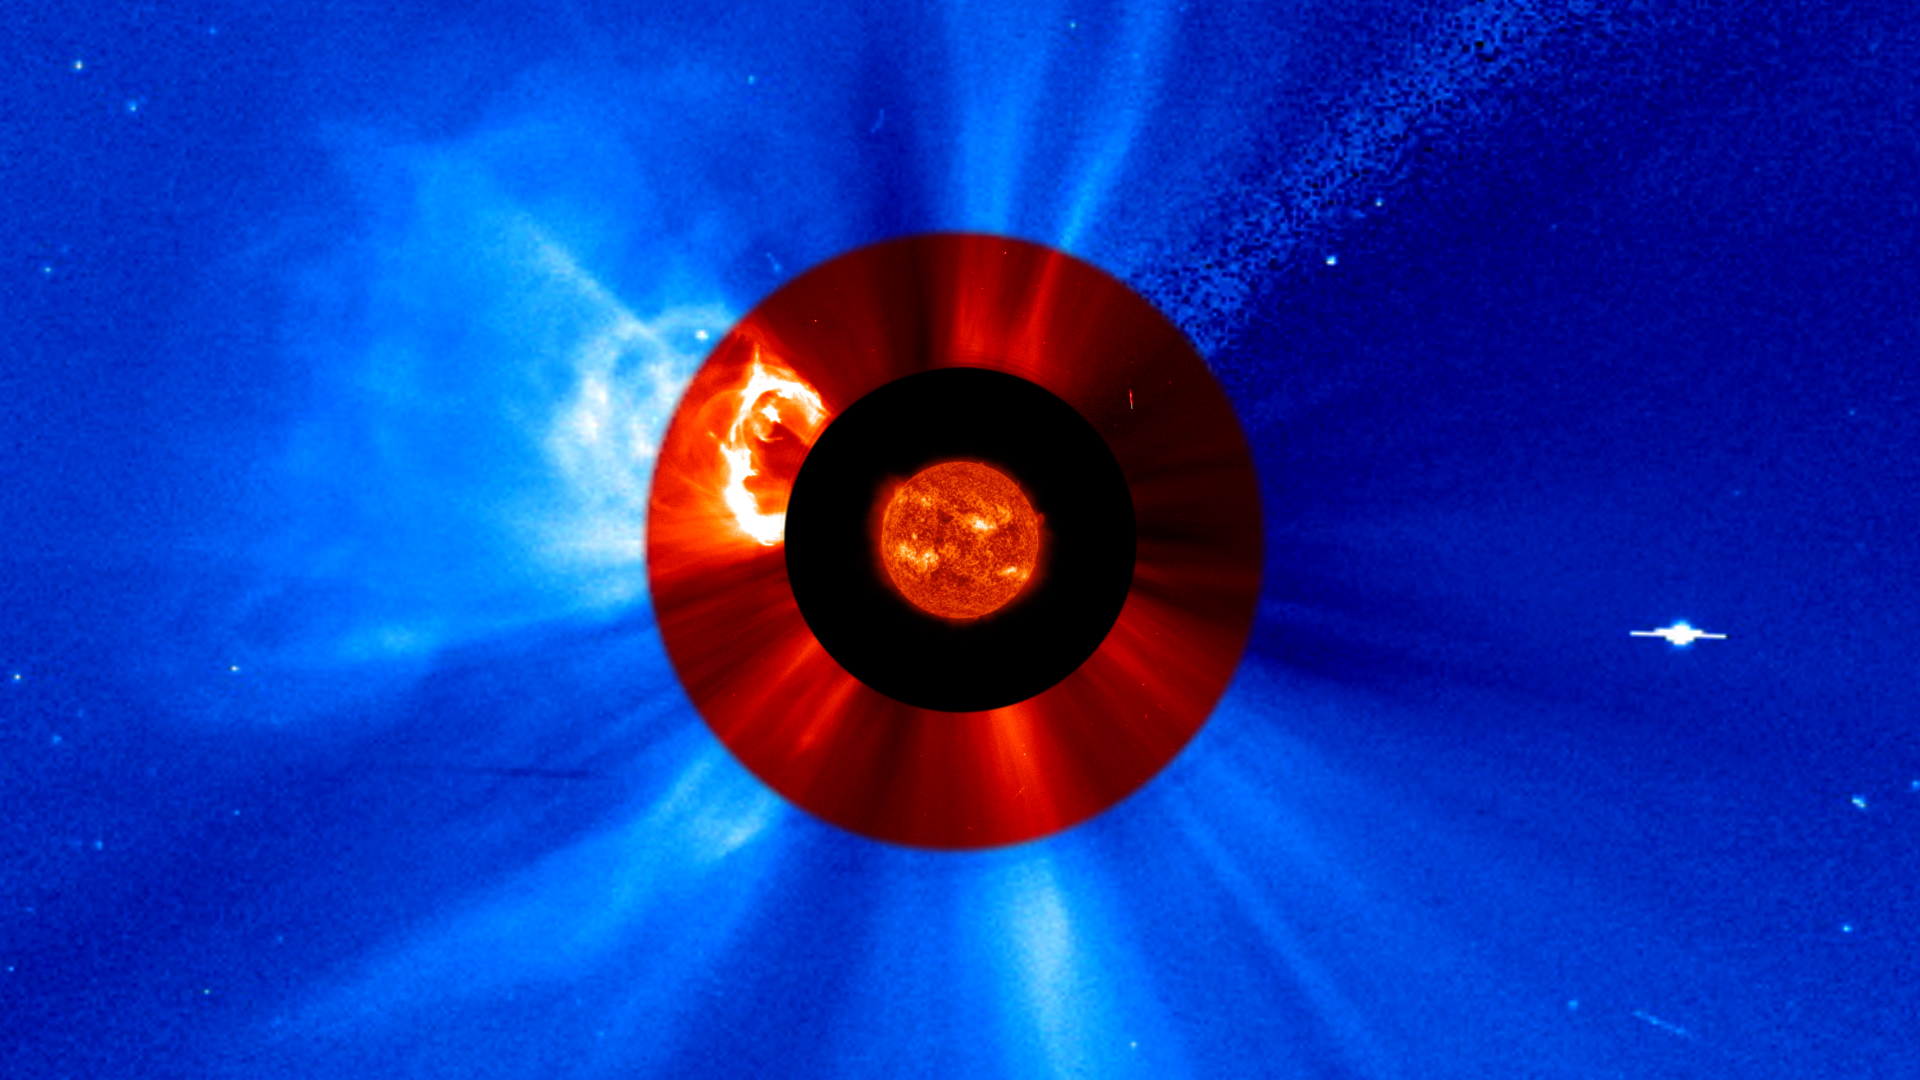 Preview Image for NASA's Heliophysics Fleet Captures May 1, 2013 Prominence Eruption and CME